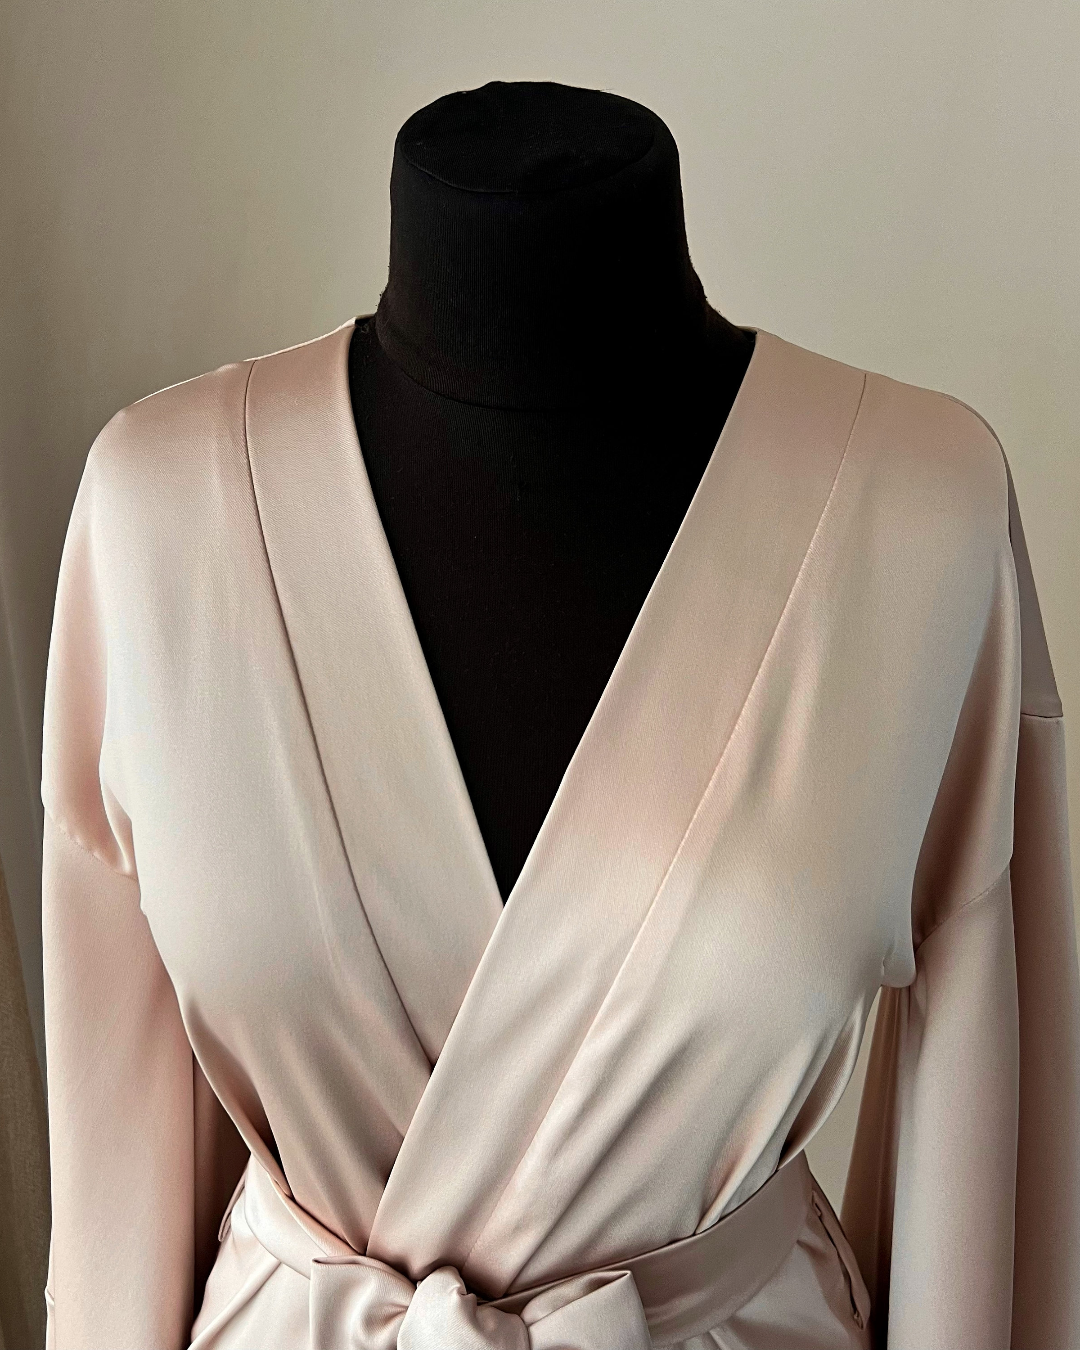 a mannequin wearing a pink dress with a black shirt underneath it